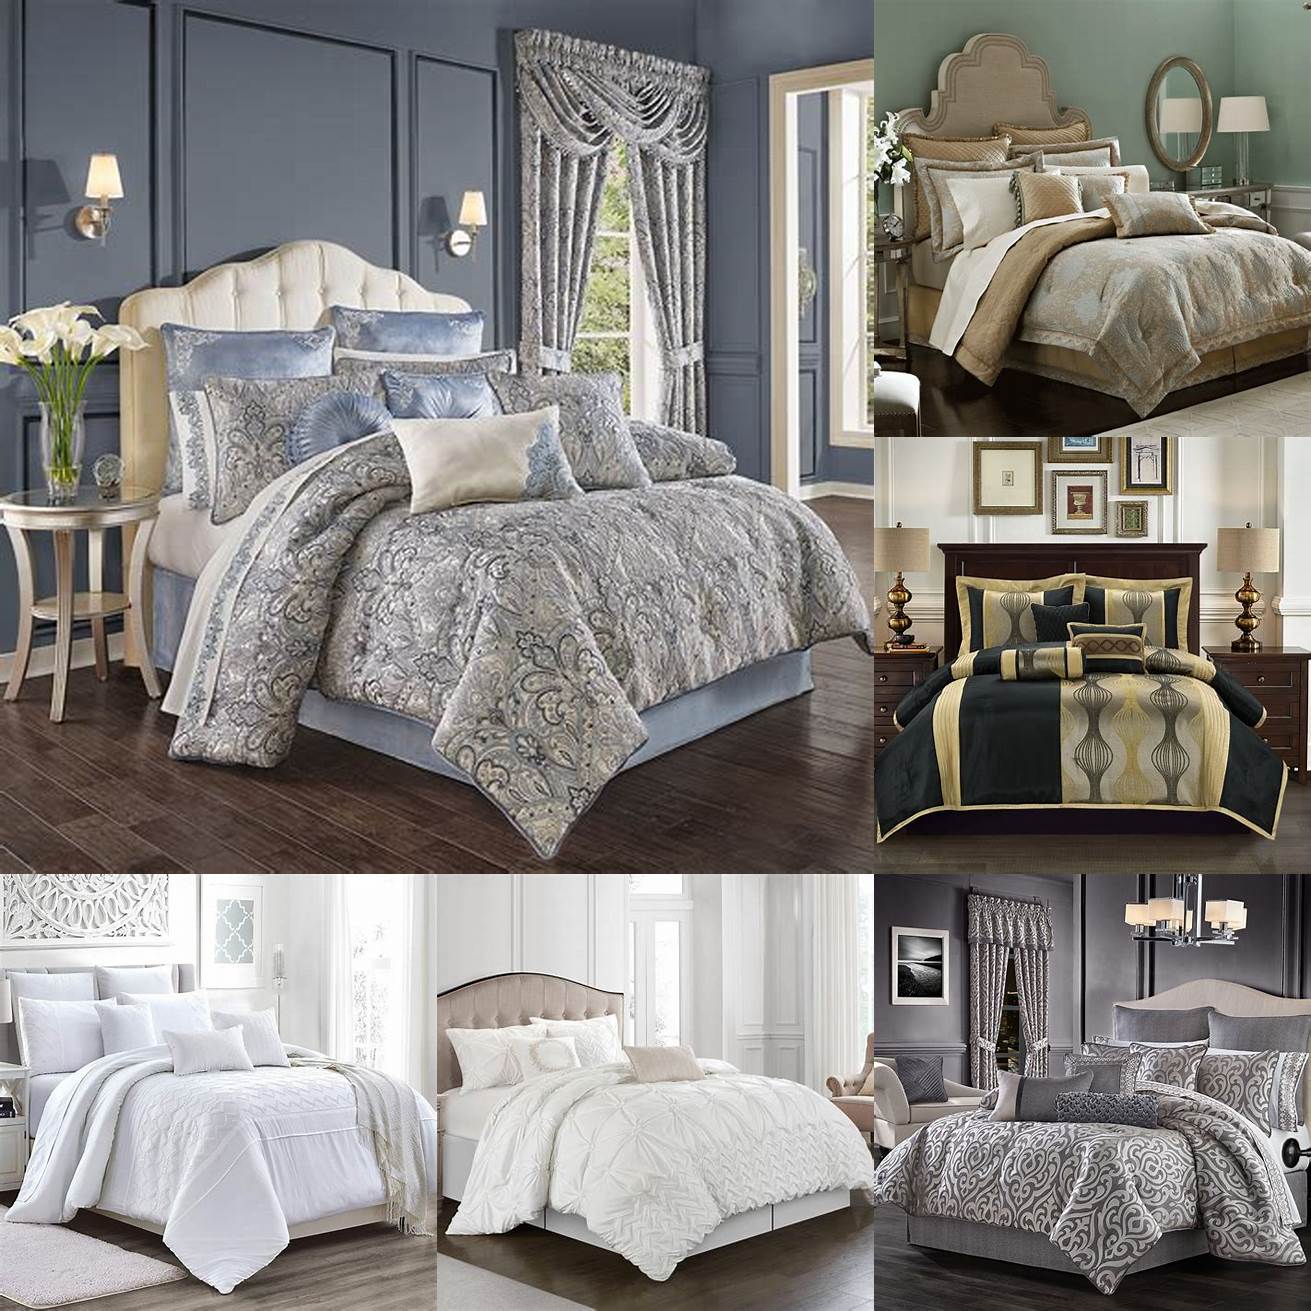 Invest in bedding specifically designed for a California King Bed